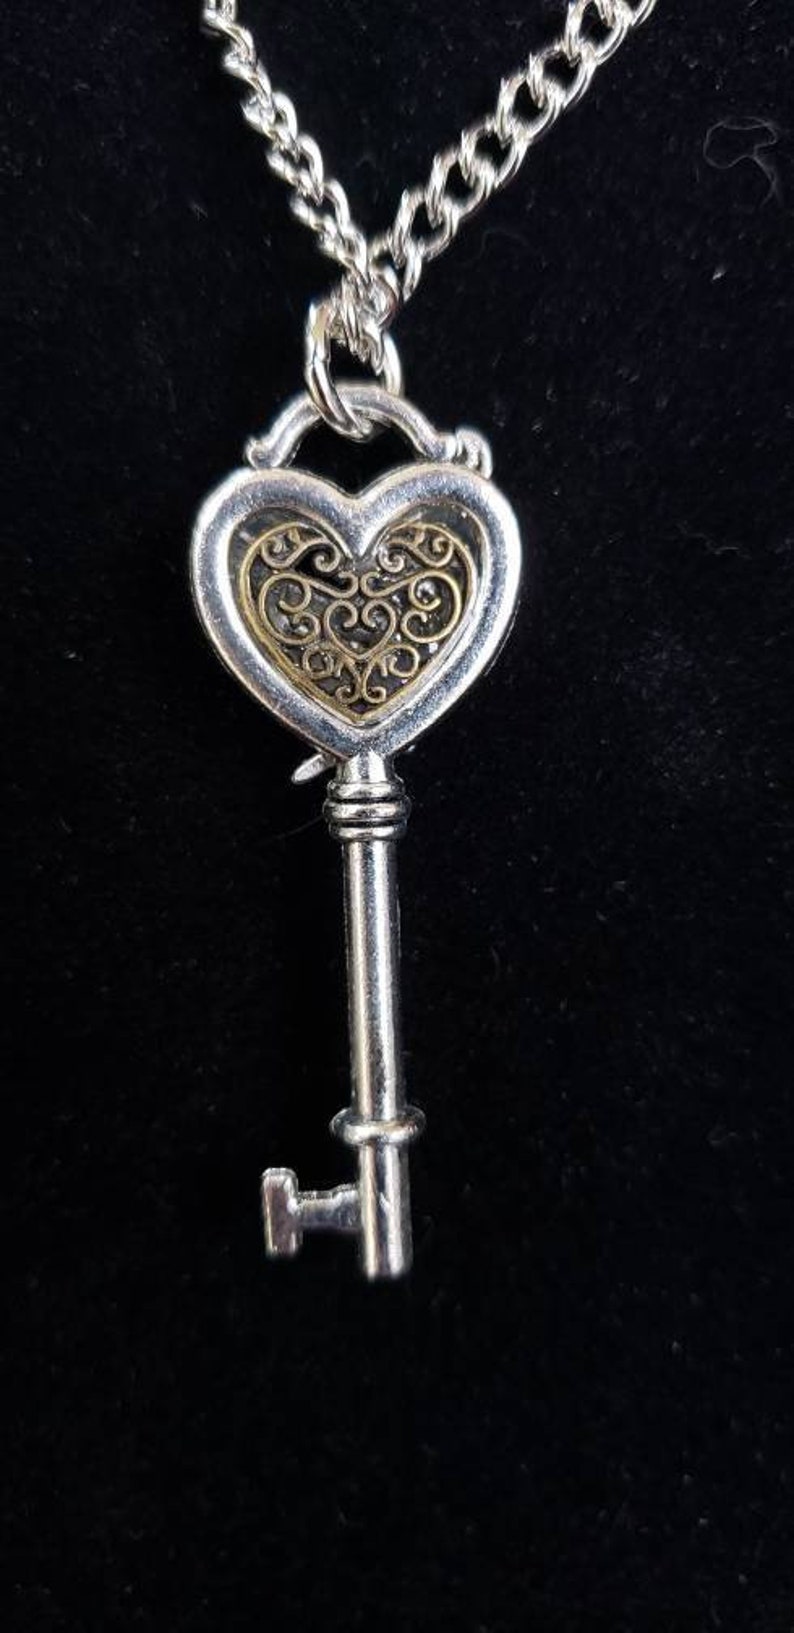 N02 the Queen's Key the Symbol of His Chastity Cuckold - Etsy Australia